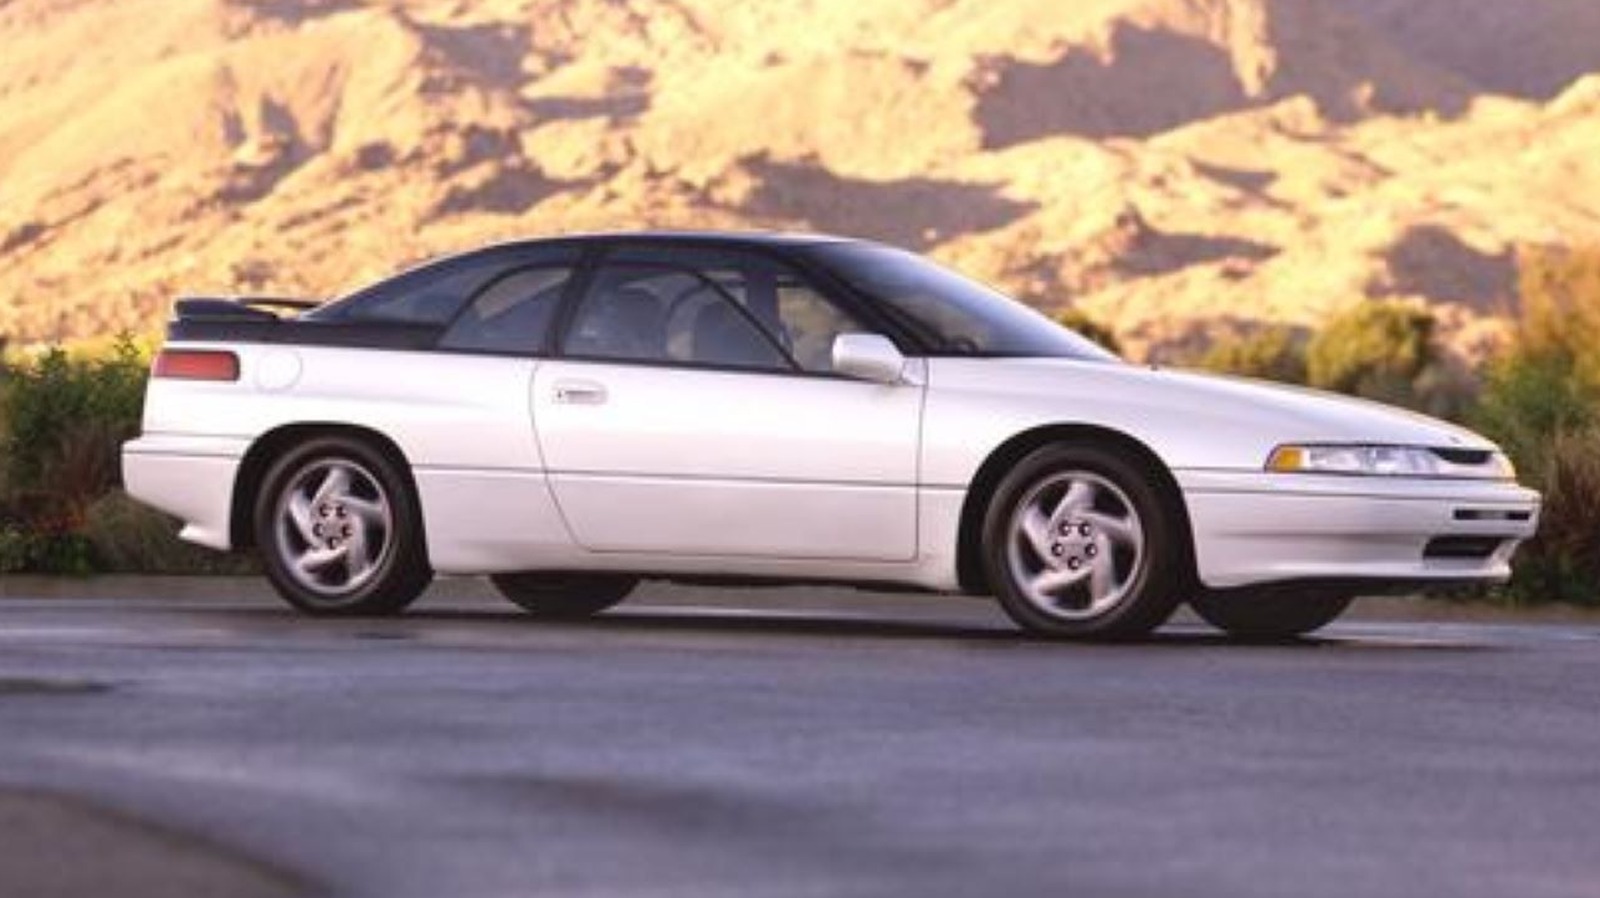 Why The Subaru SVX Was A Complete Flop